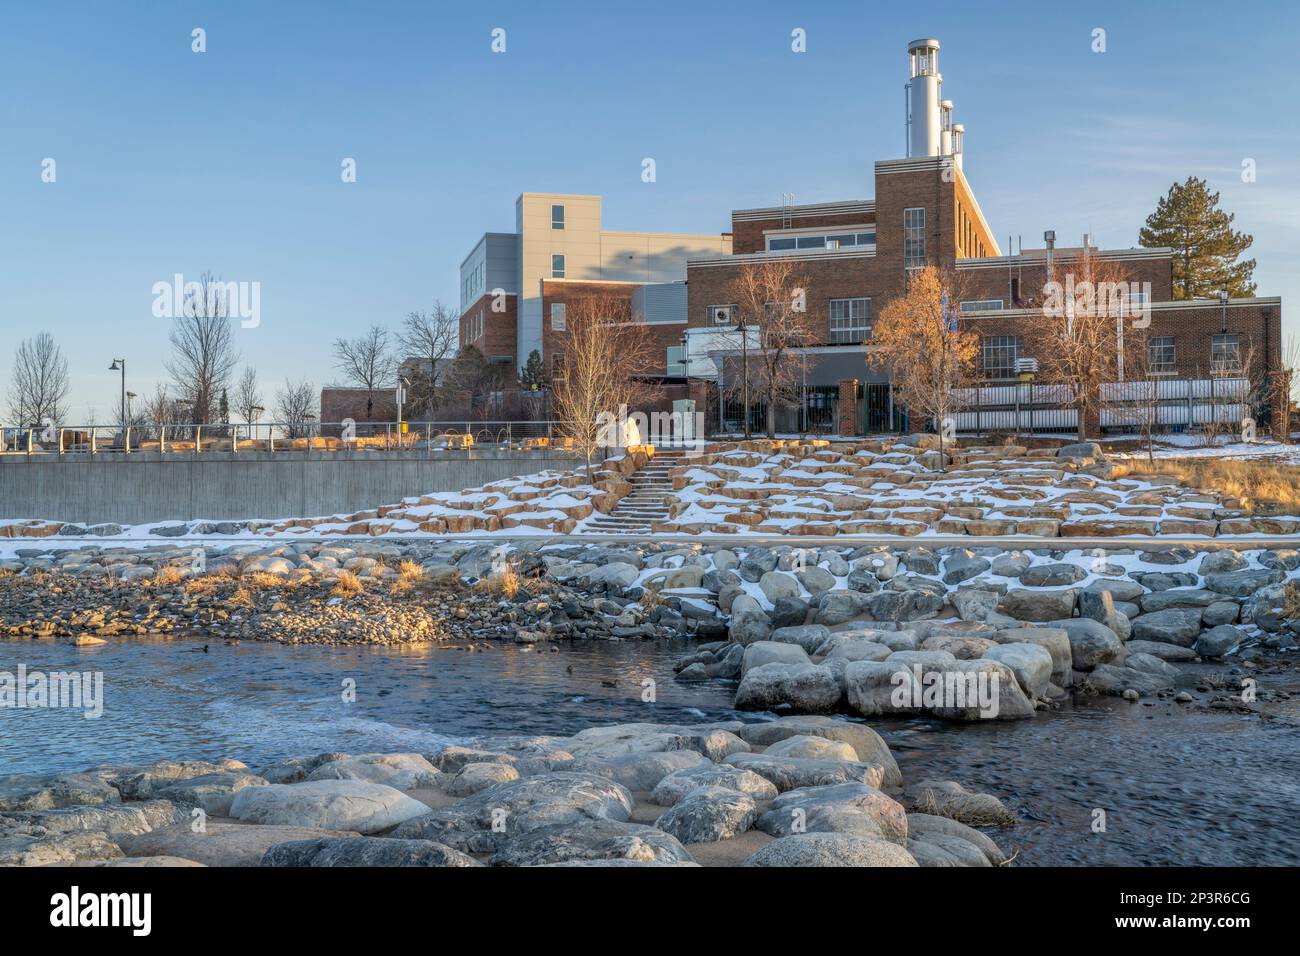 Poudre River at a whitewater park in downtown of Fort Collins Colorado with Powerhouse Energy Campus of Colorado State University in background, winte Stock Photo